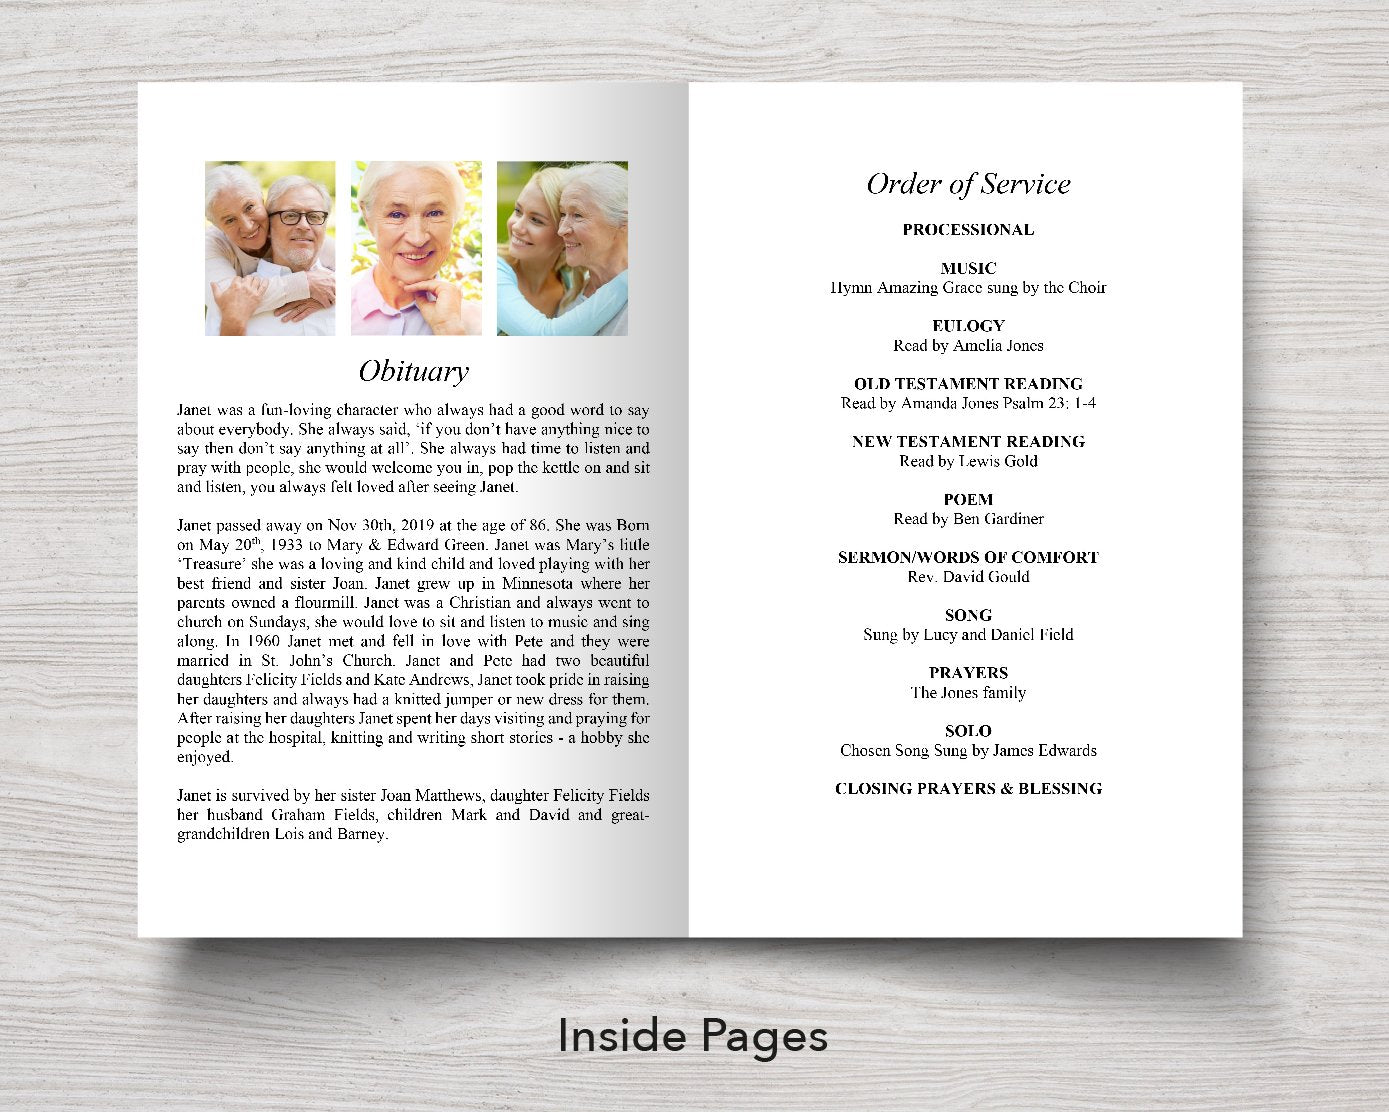 8 Page Photos Funeral Program Template